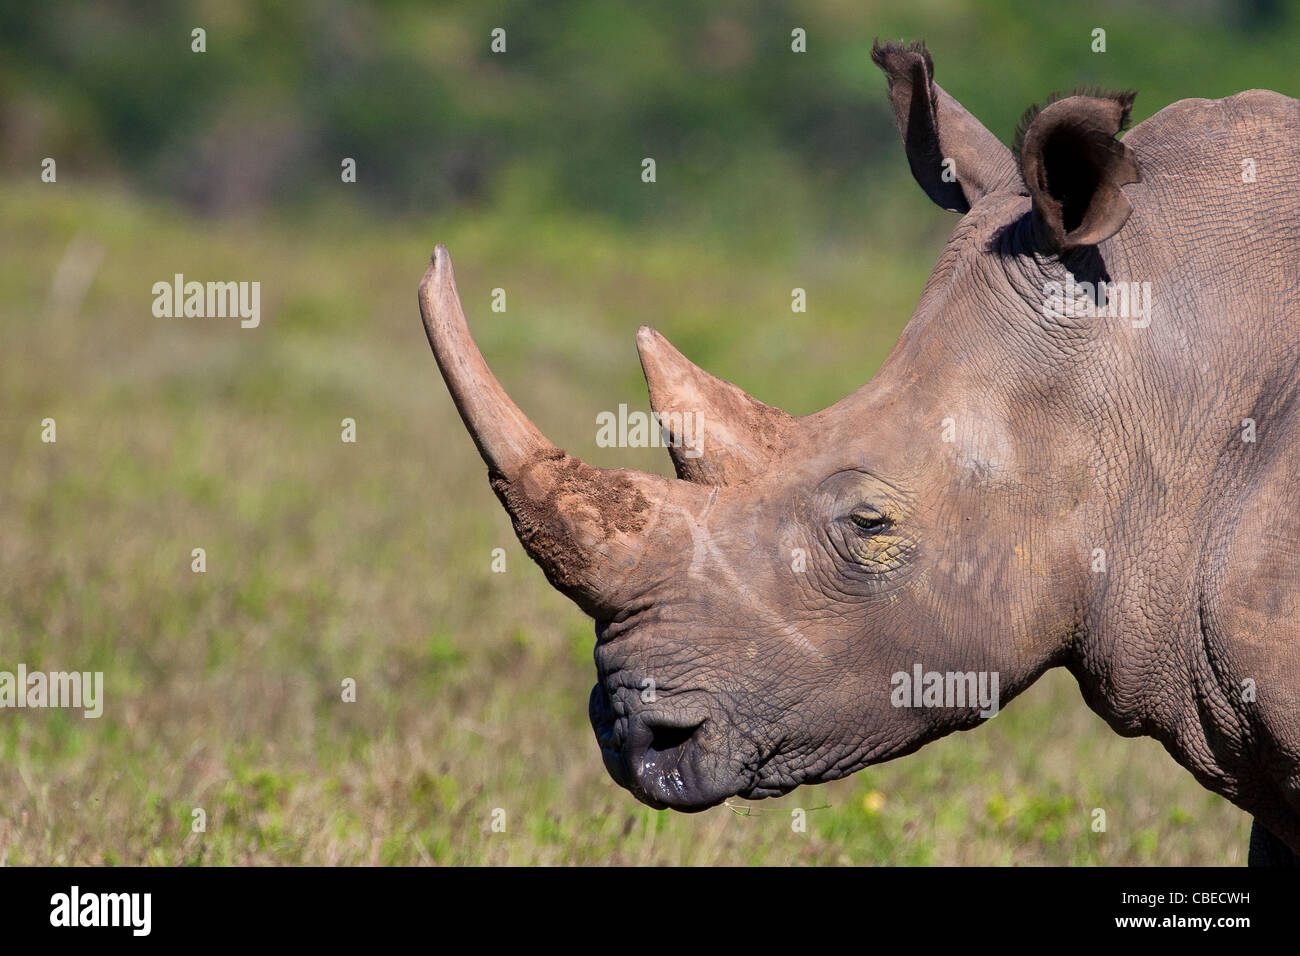 A close Up portrait of a White Rhinoceros or Square-lipped rhinoceros (Ceratotherium simum) captured in Kariega, South Africa Stock Photo